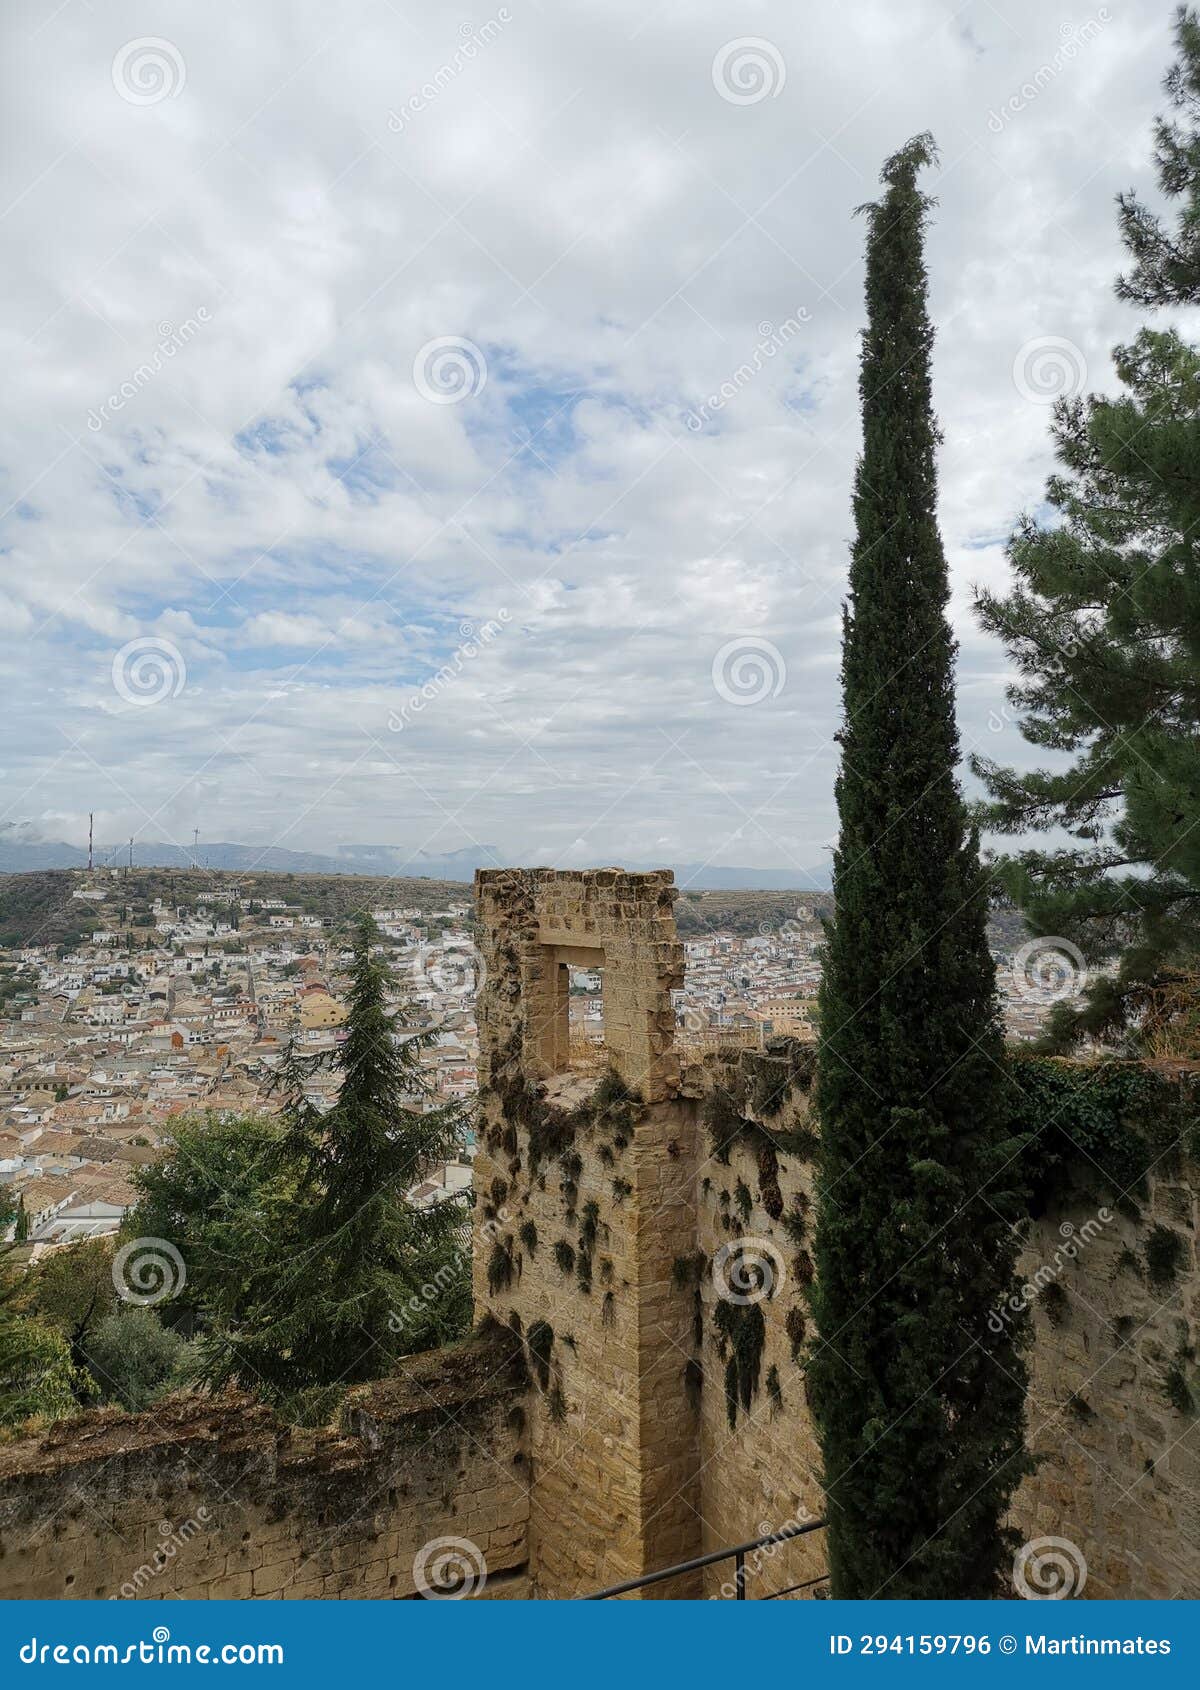 part of the fortress wall next to the mayor abbey church, la mota fortress, alcalÃ¡ la real, andalucÃ­a, spain